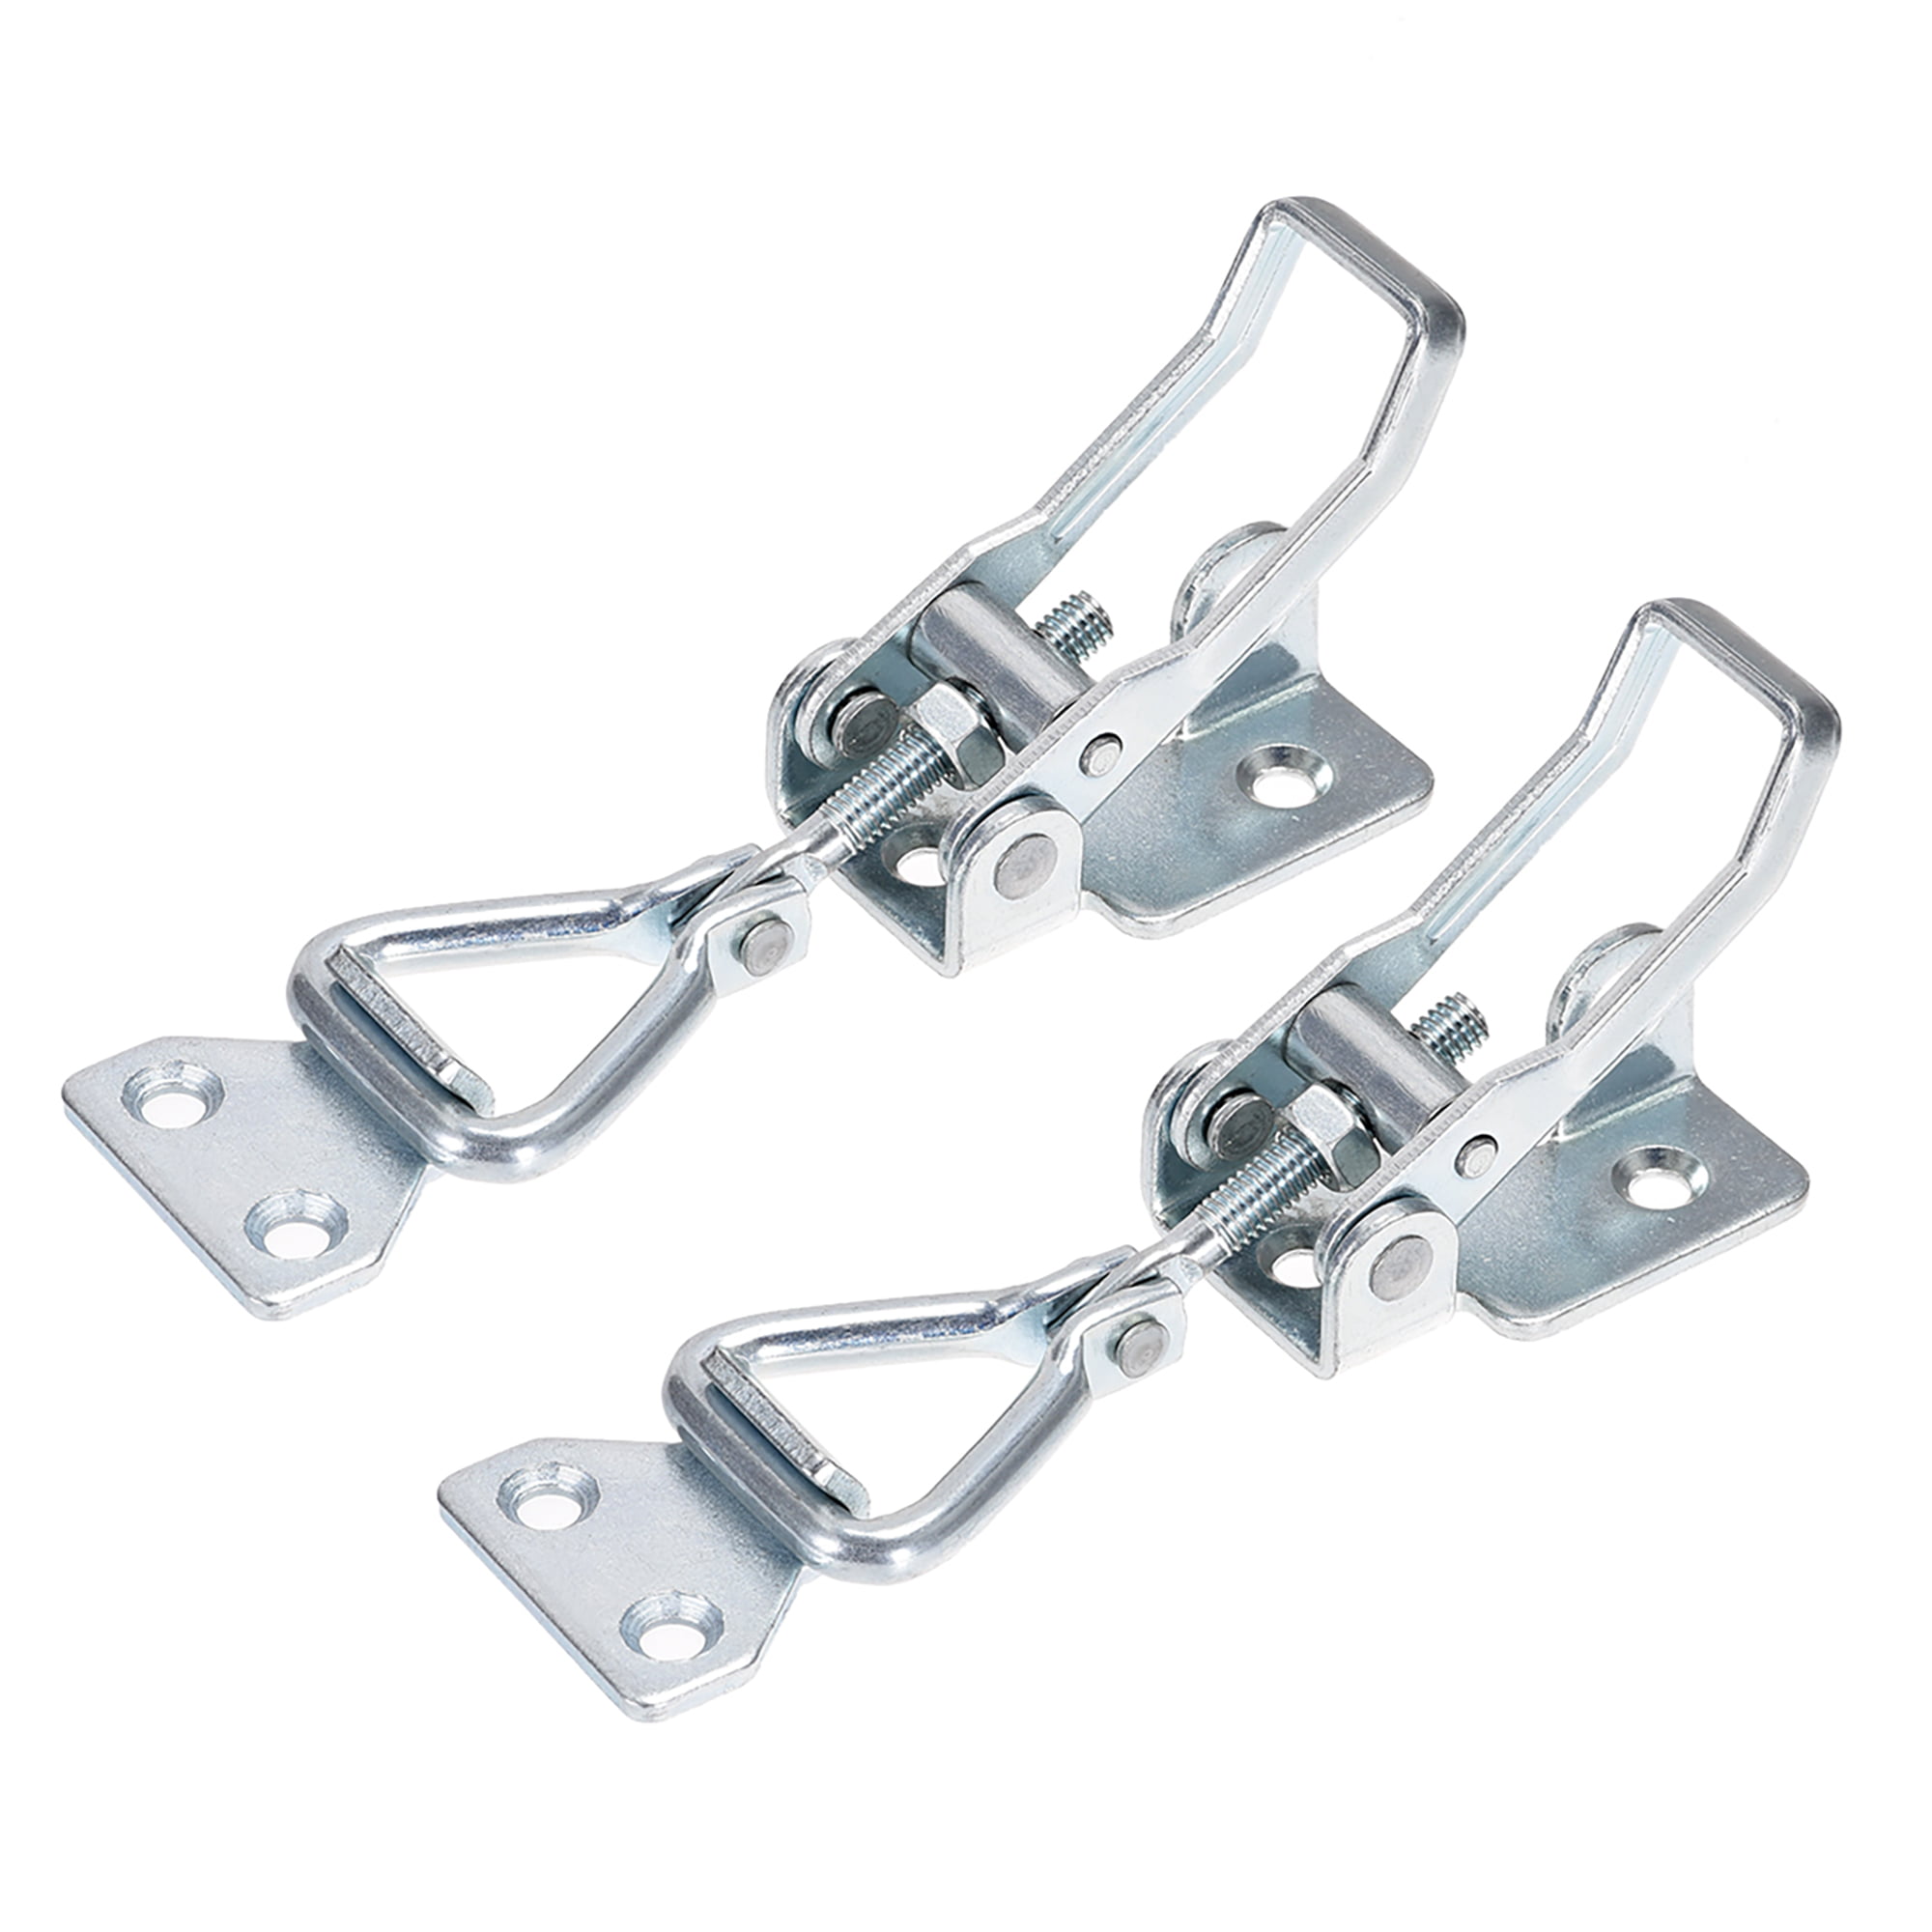 2KN Locking Load Iron Pull-Action Latch Adjustable Toggle Clamp with Keyhole